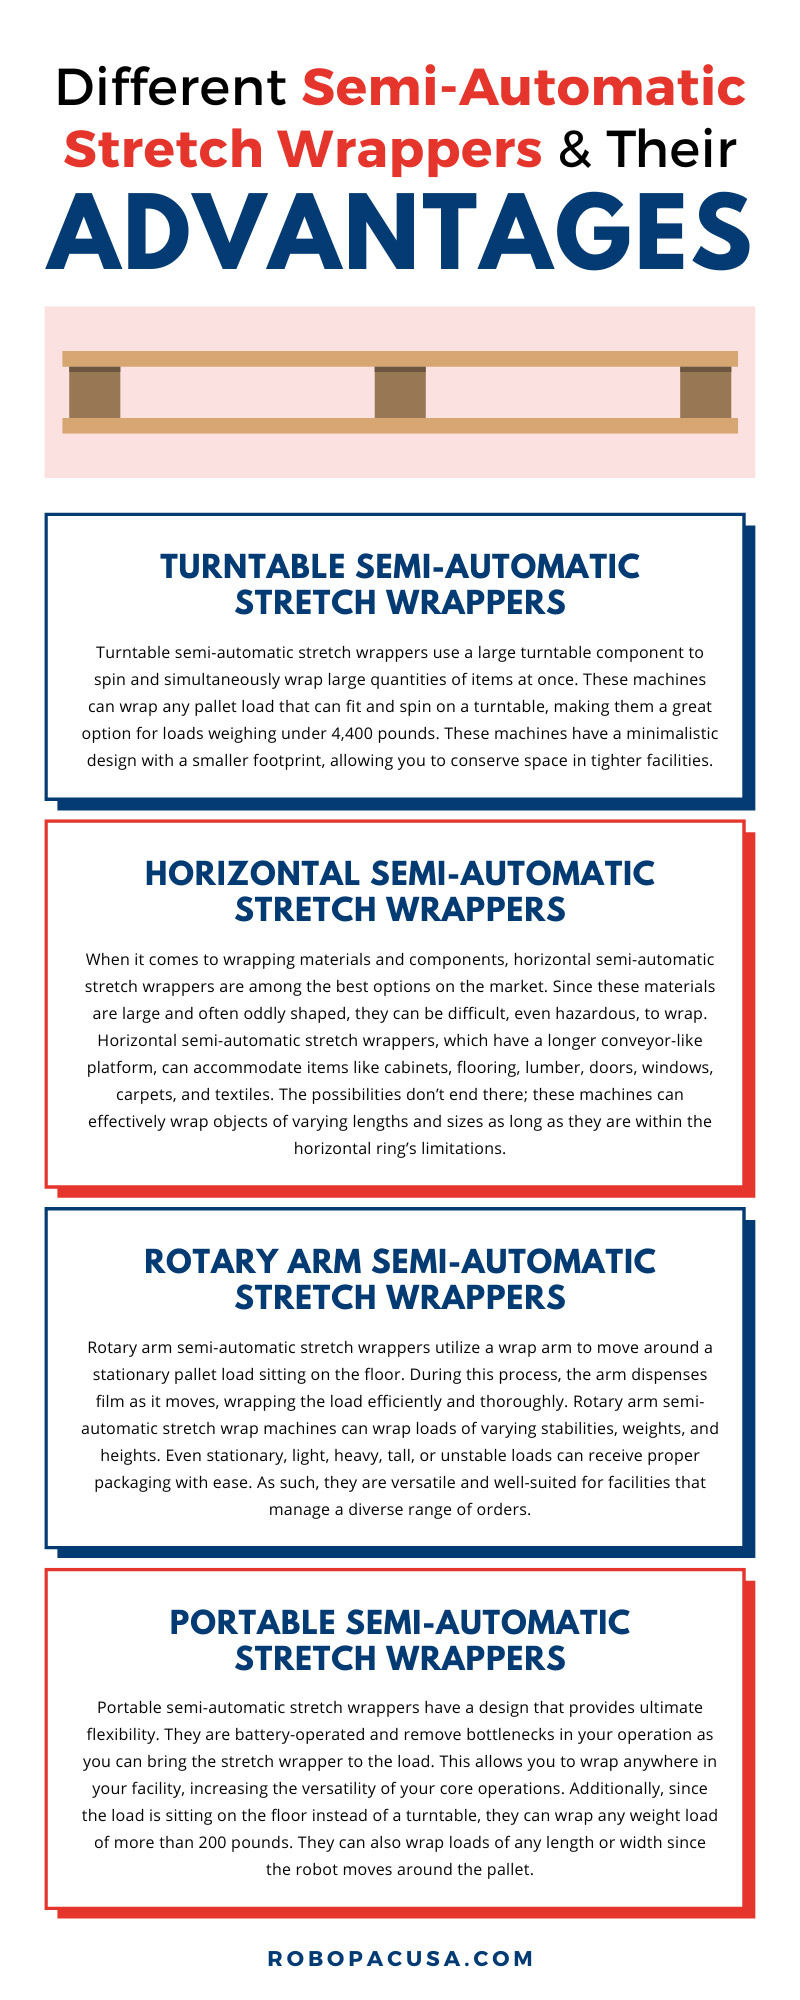 Different Semi-Automatic Stretch Wrappers & Their Advantages